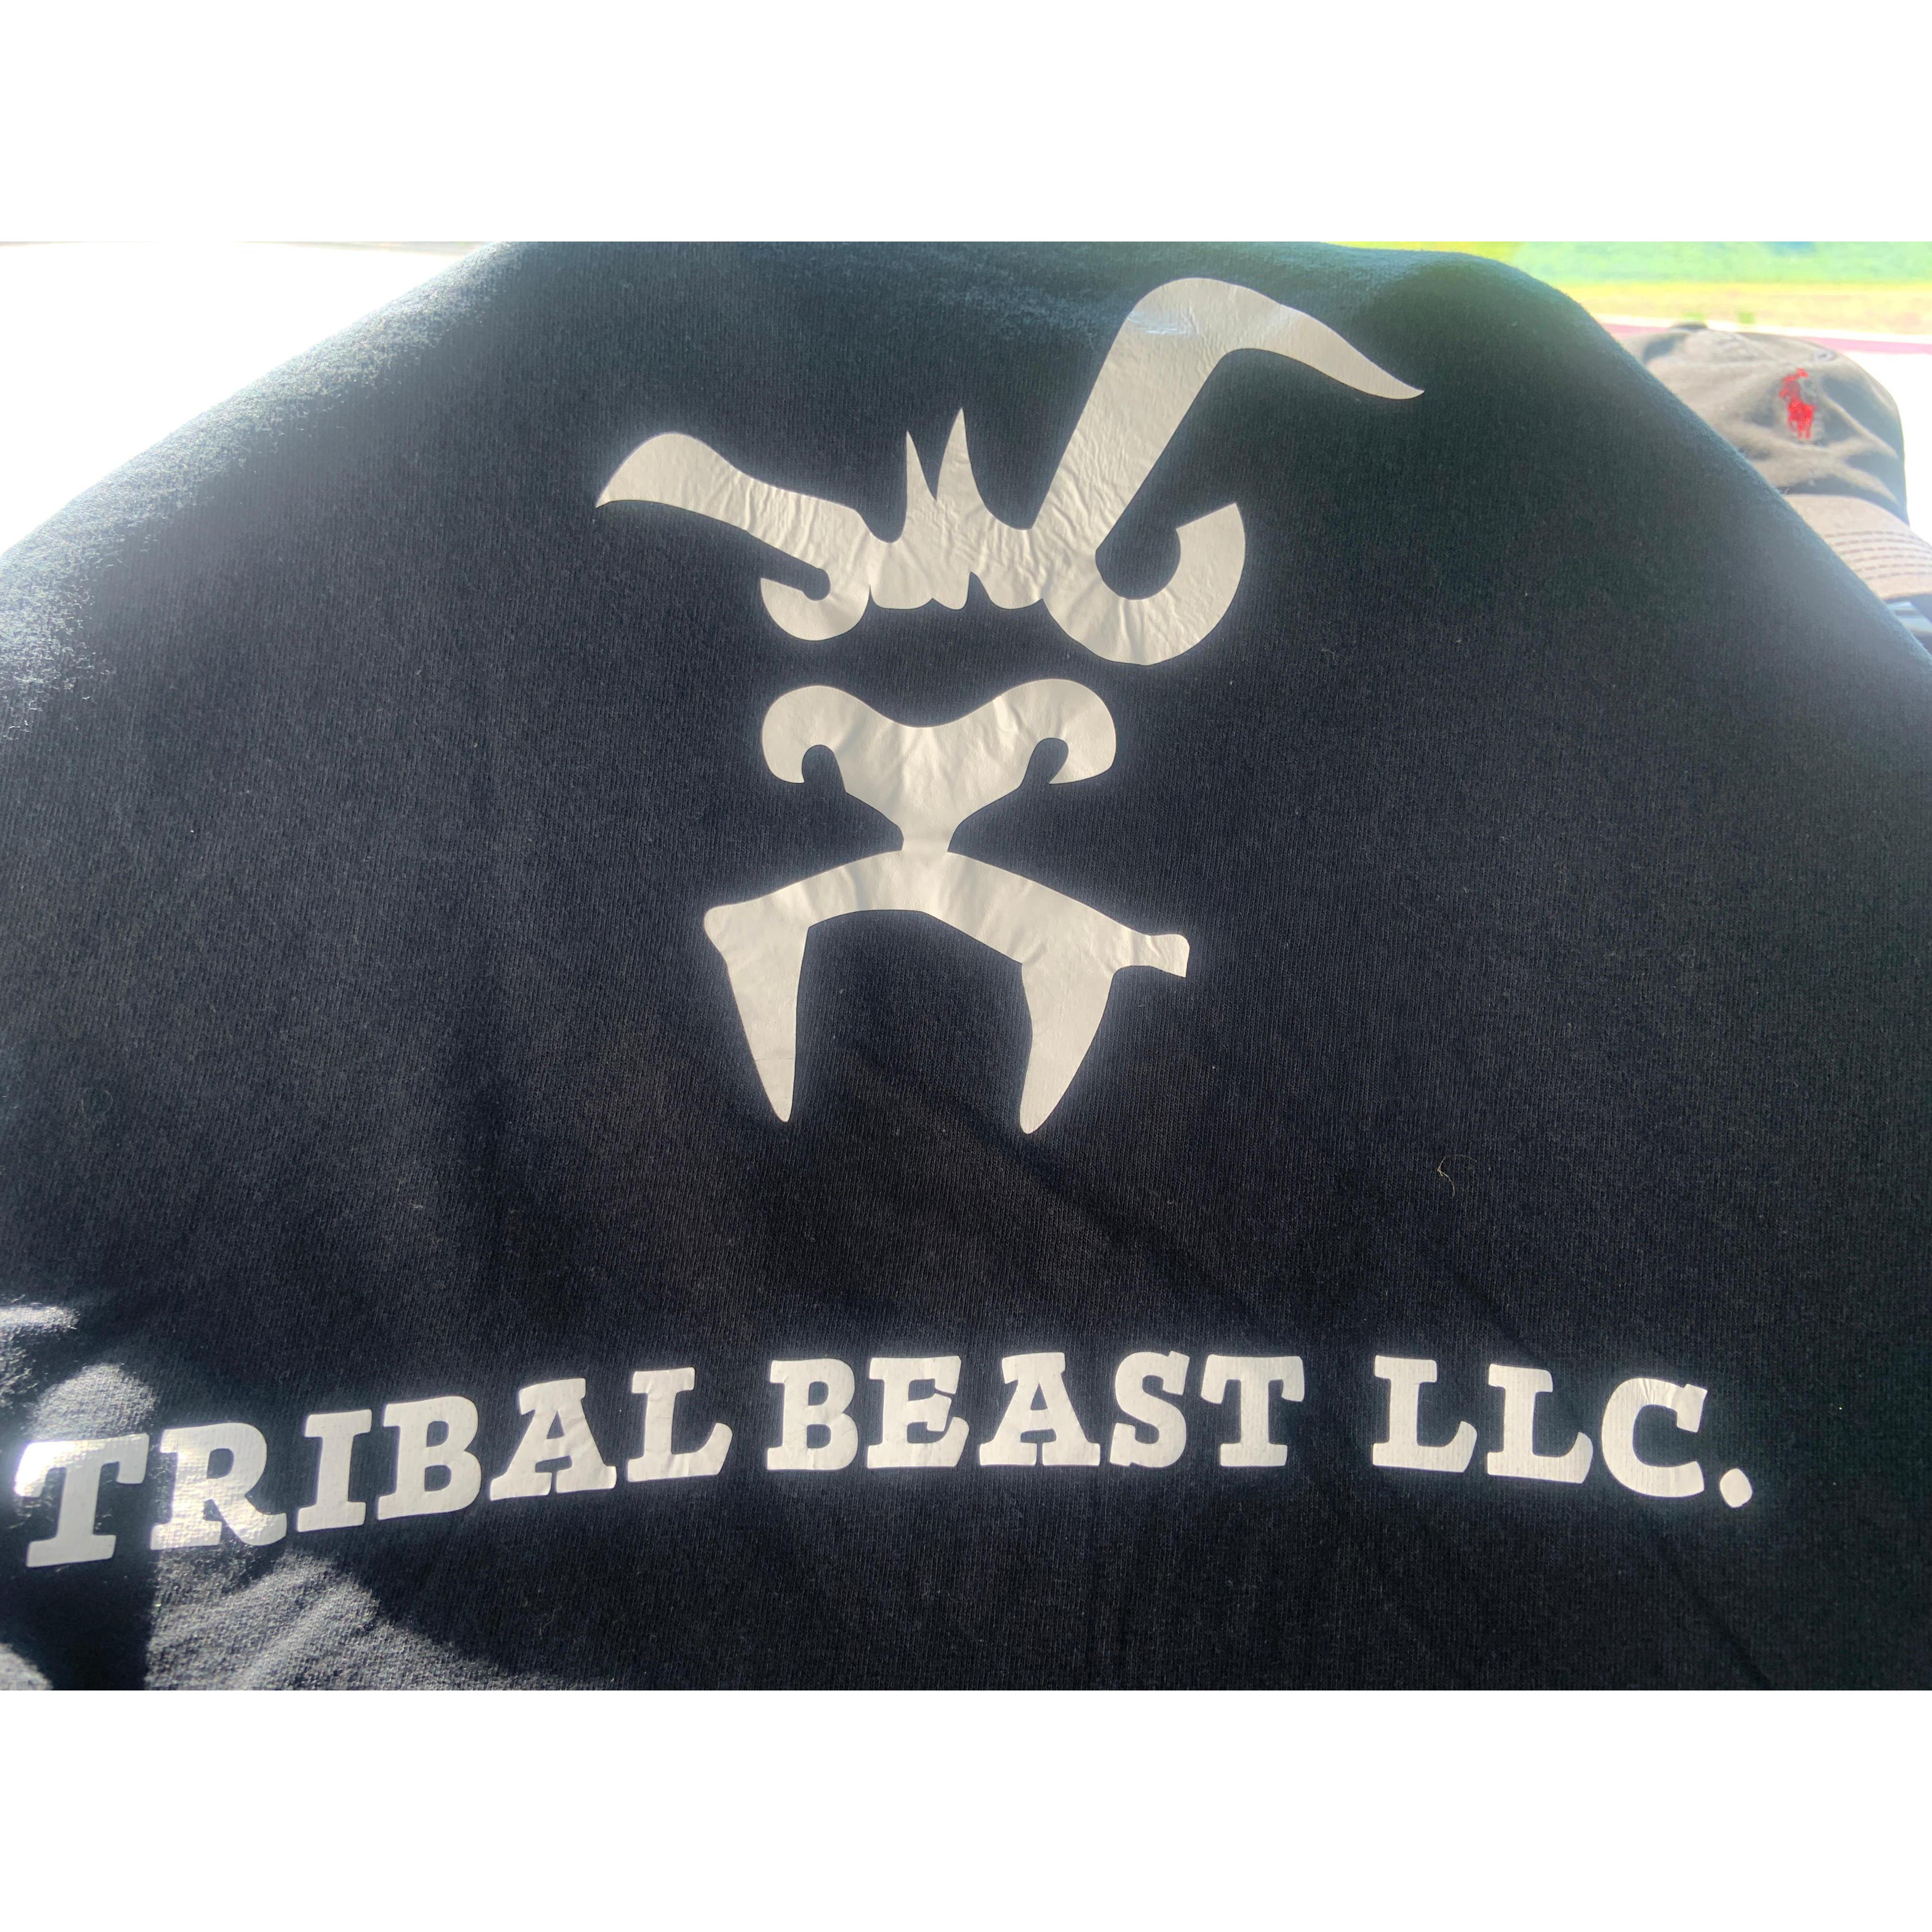 Tribalbeast package delivery services Photo